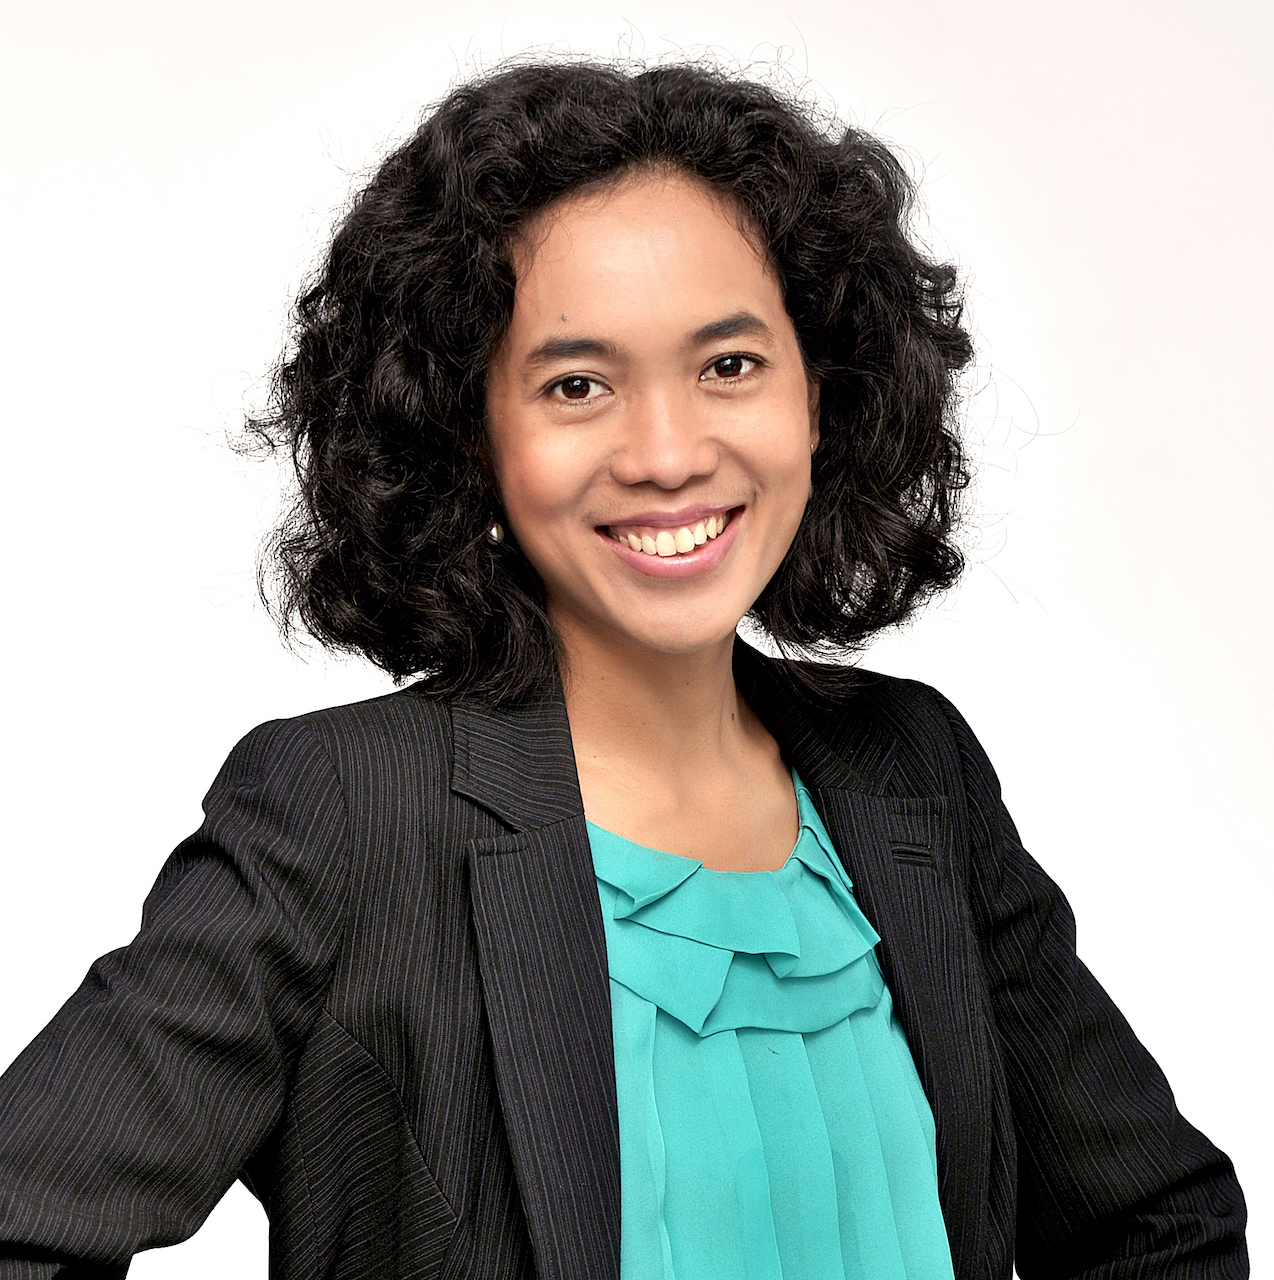 A headshot of smiling Naila Maya Shofia who has curly black hair at shoulder length. She is wearing a black blazer with a bright turquoise blouse.